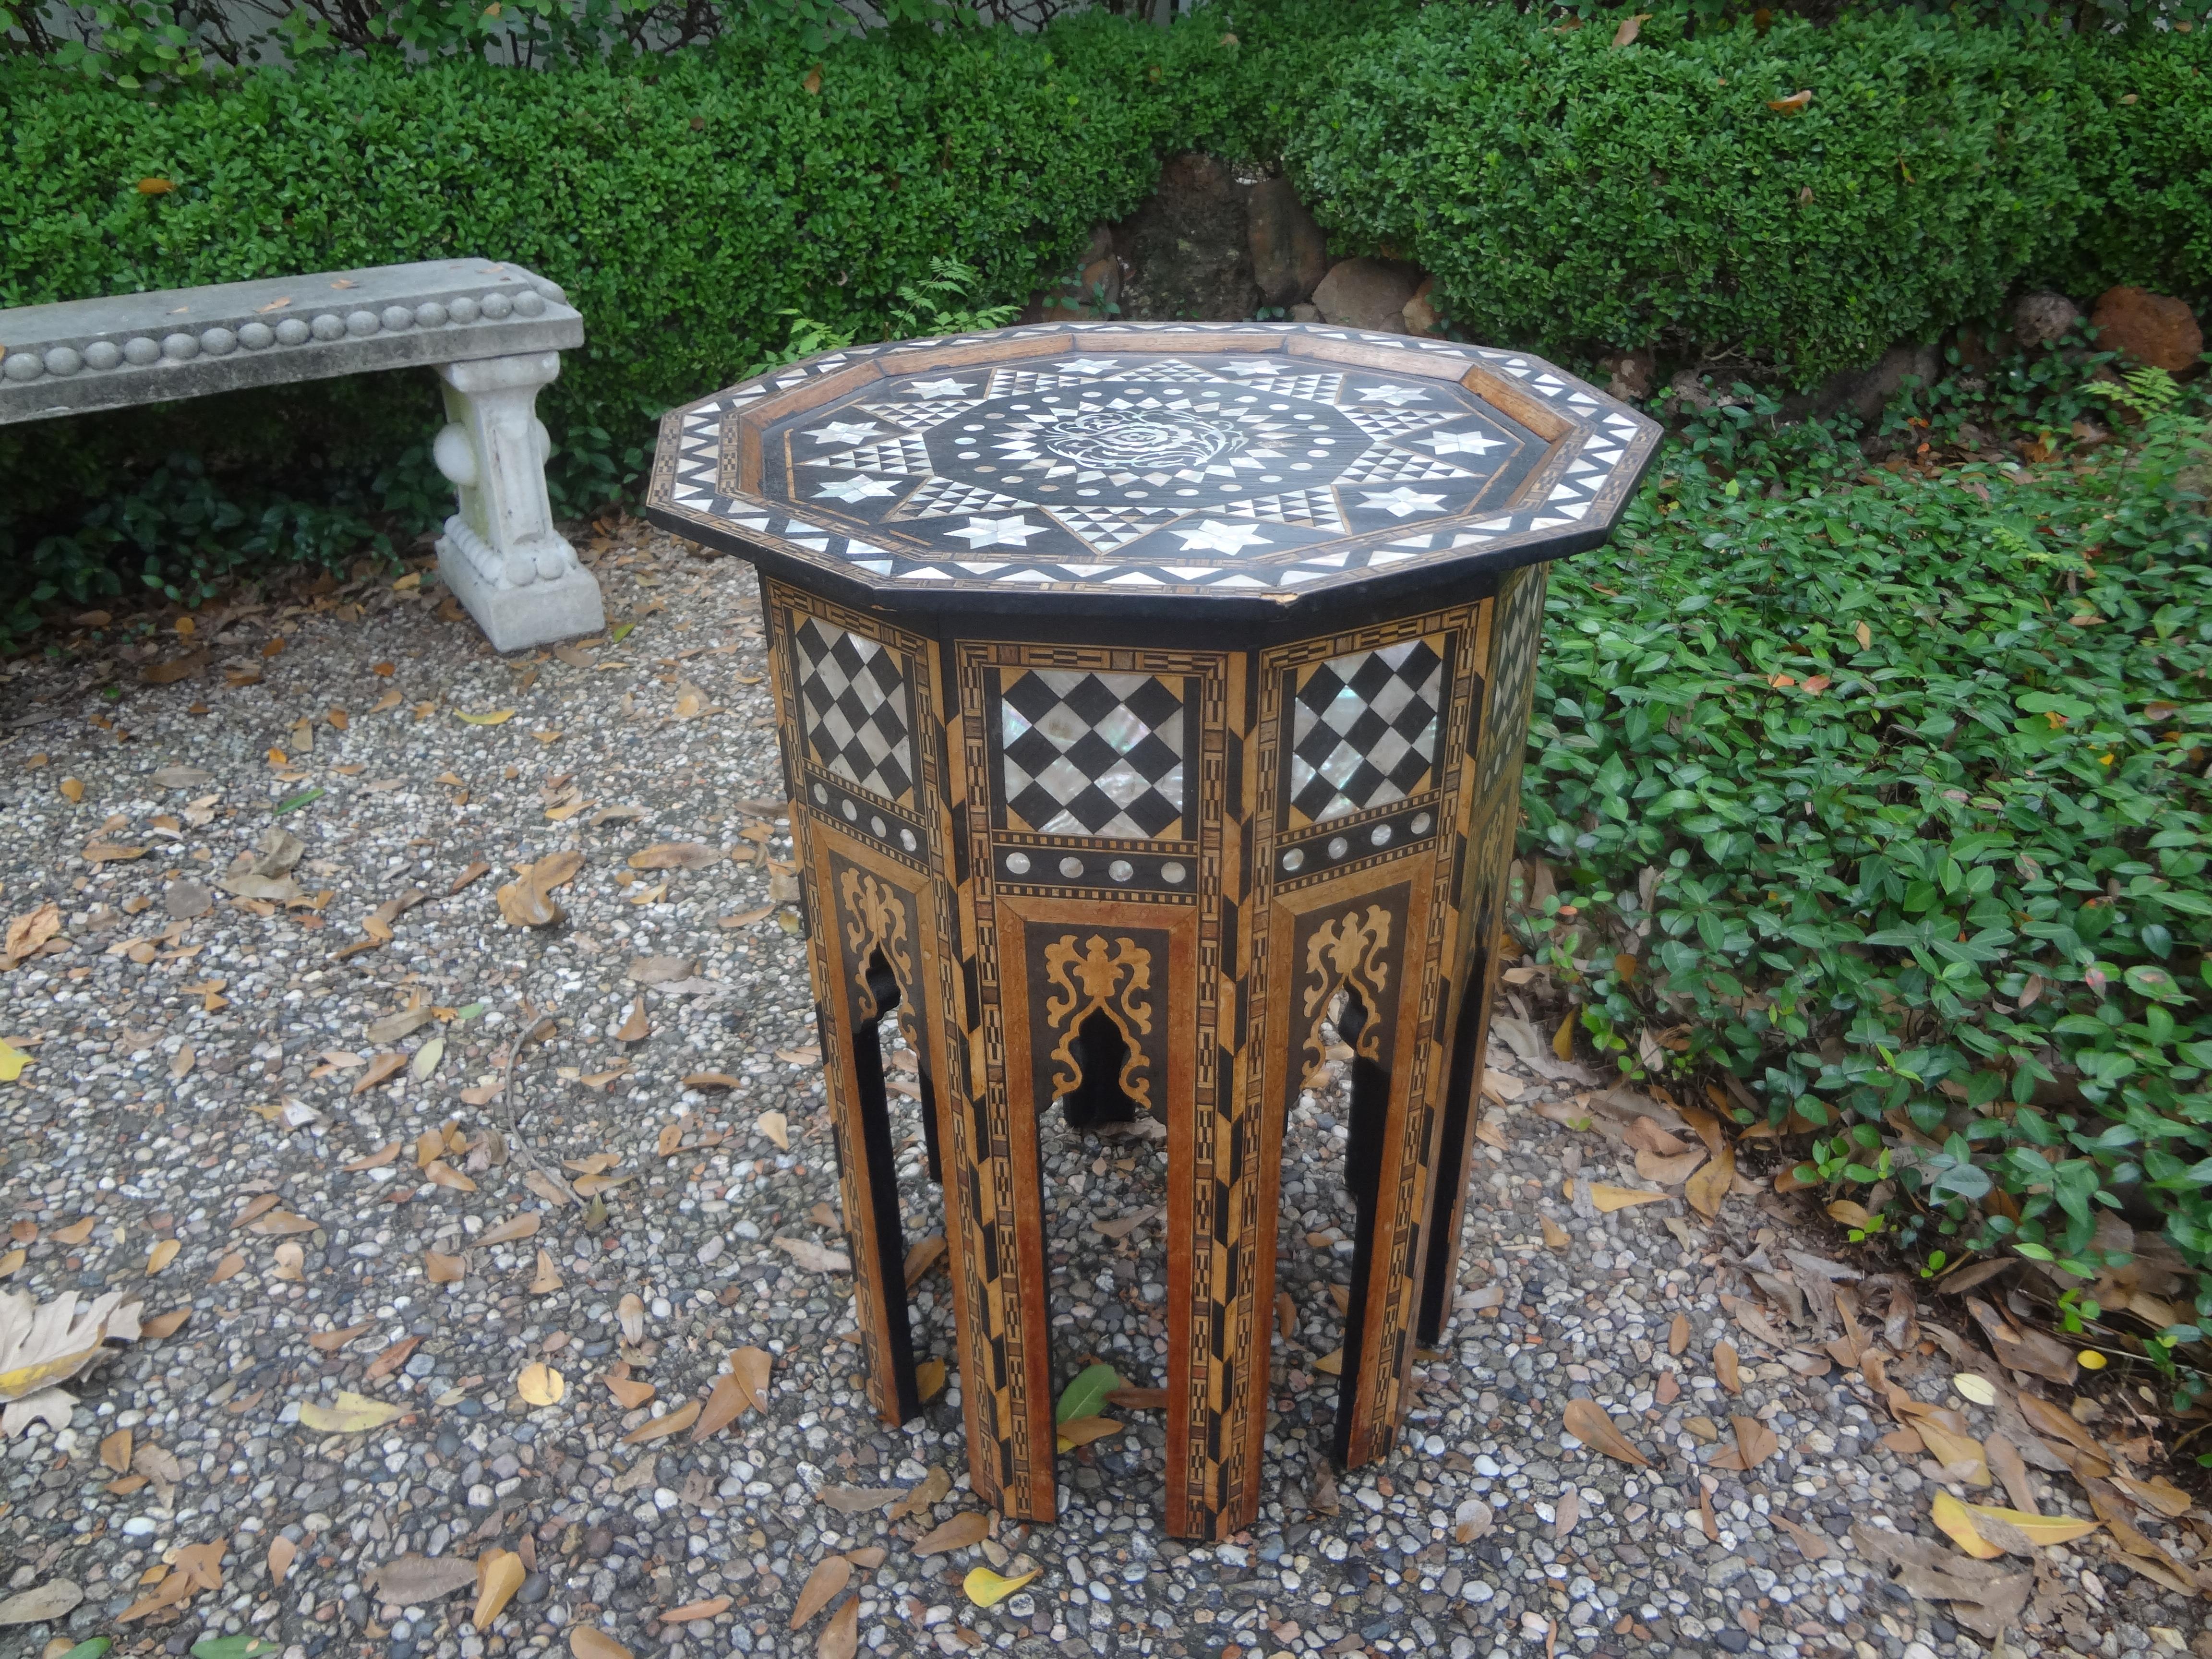 Antique Middle Eastern, Moroccan or Moorish Arabesque style octagonal side table. This beautiful table has a great pattern with alternating intricately inlaid mixed woods and mother-of-pearl in striking geometric pattern. Detailed and edged in camel